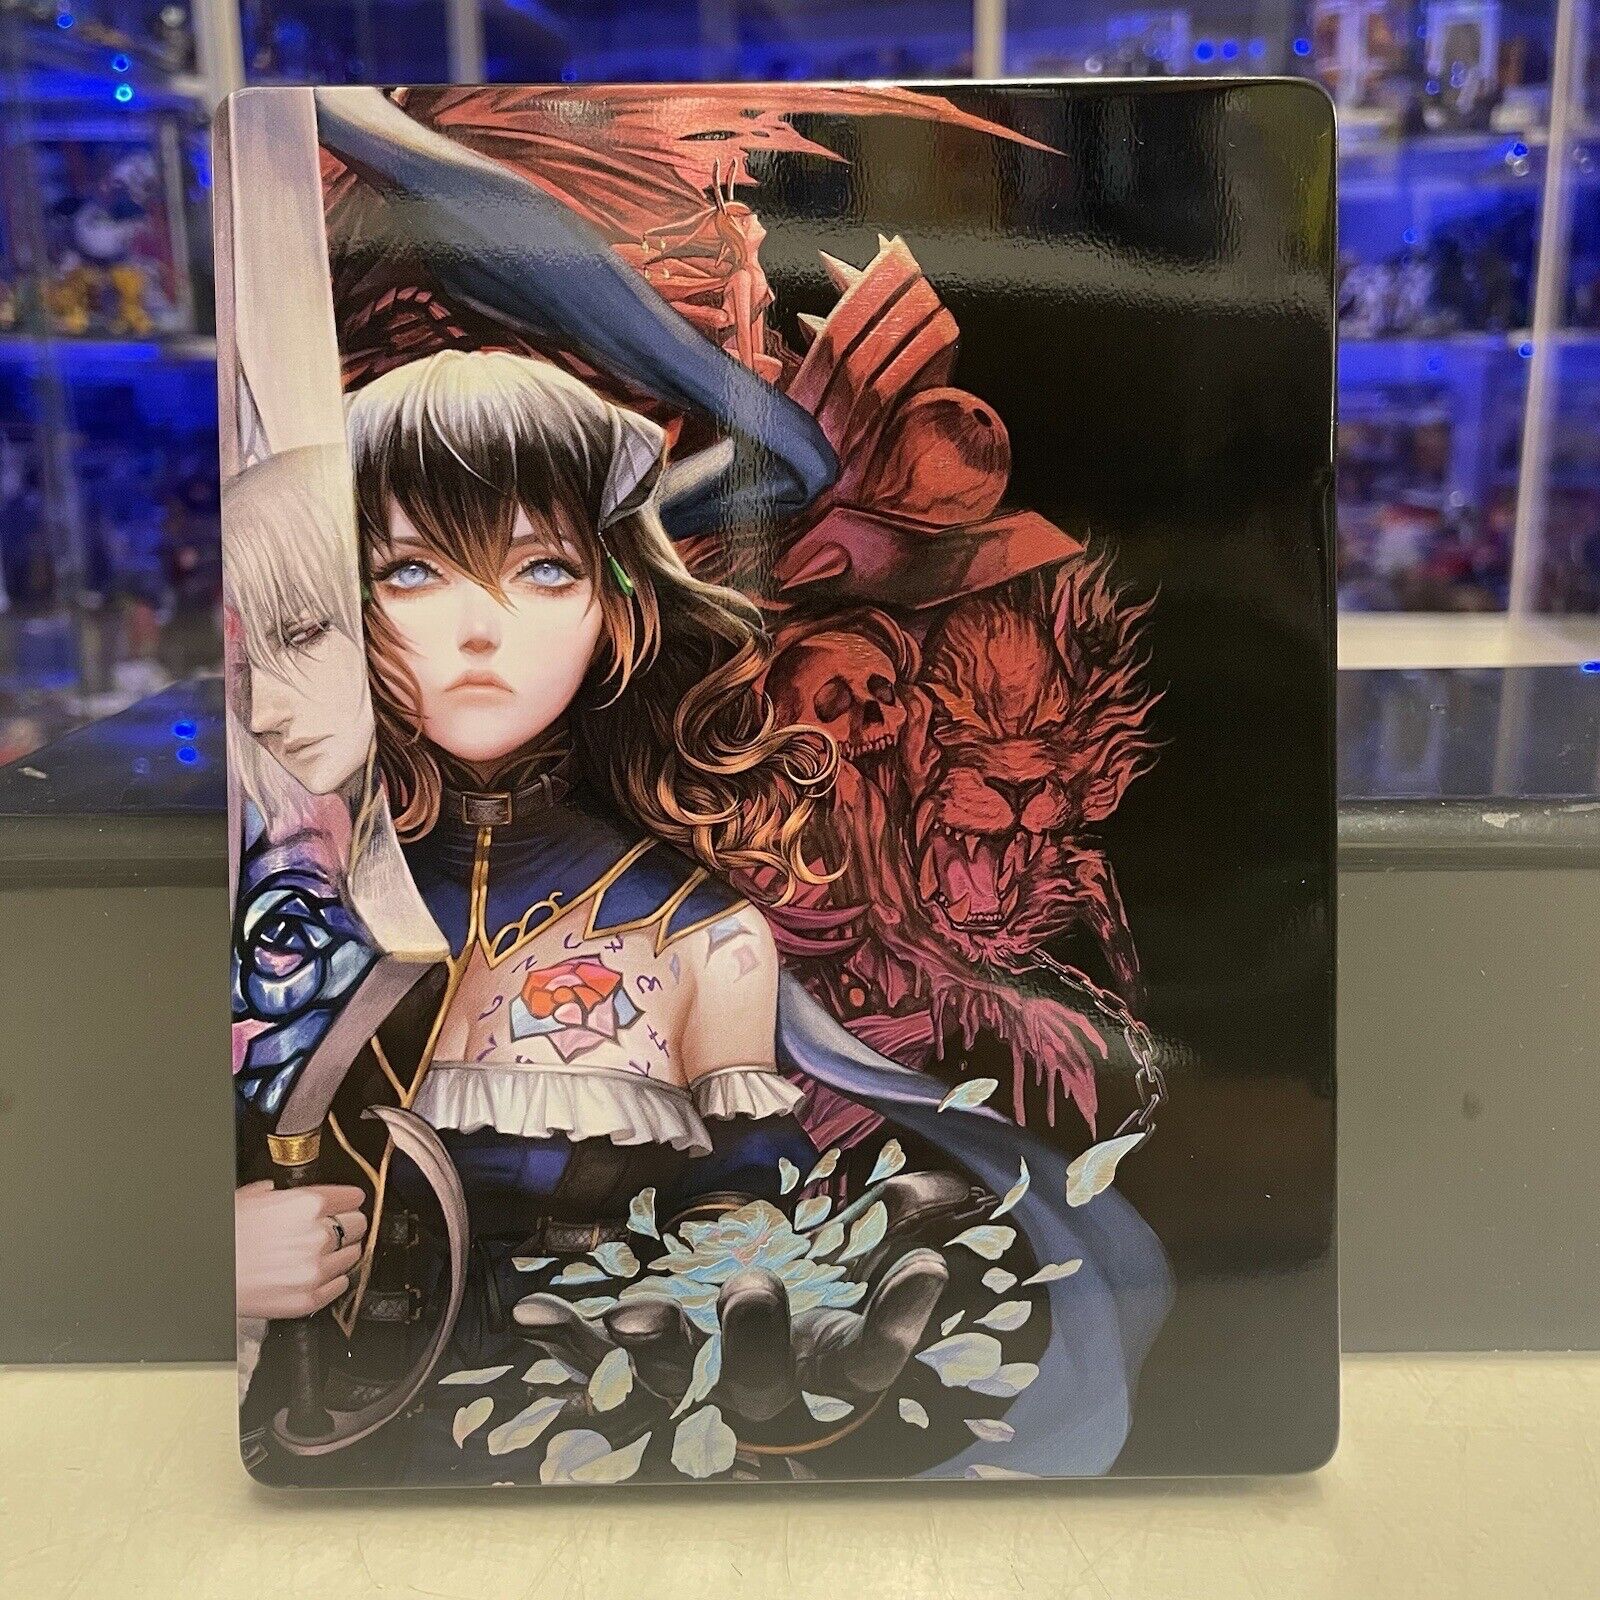 Ps4-Bloodstained-Ritual-Of-The-Night-Steelbook-Limited-Sony-Playstation-NO-GIOCO-145380208707